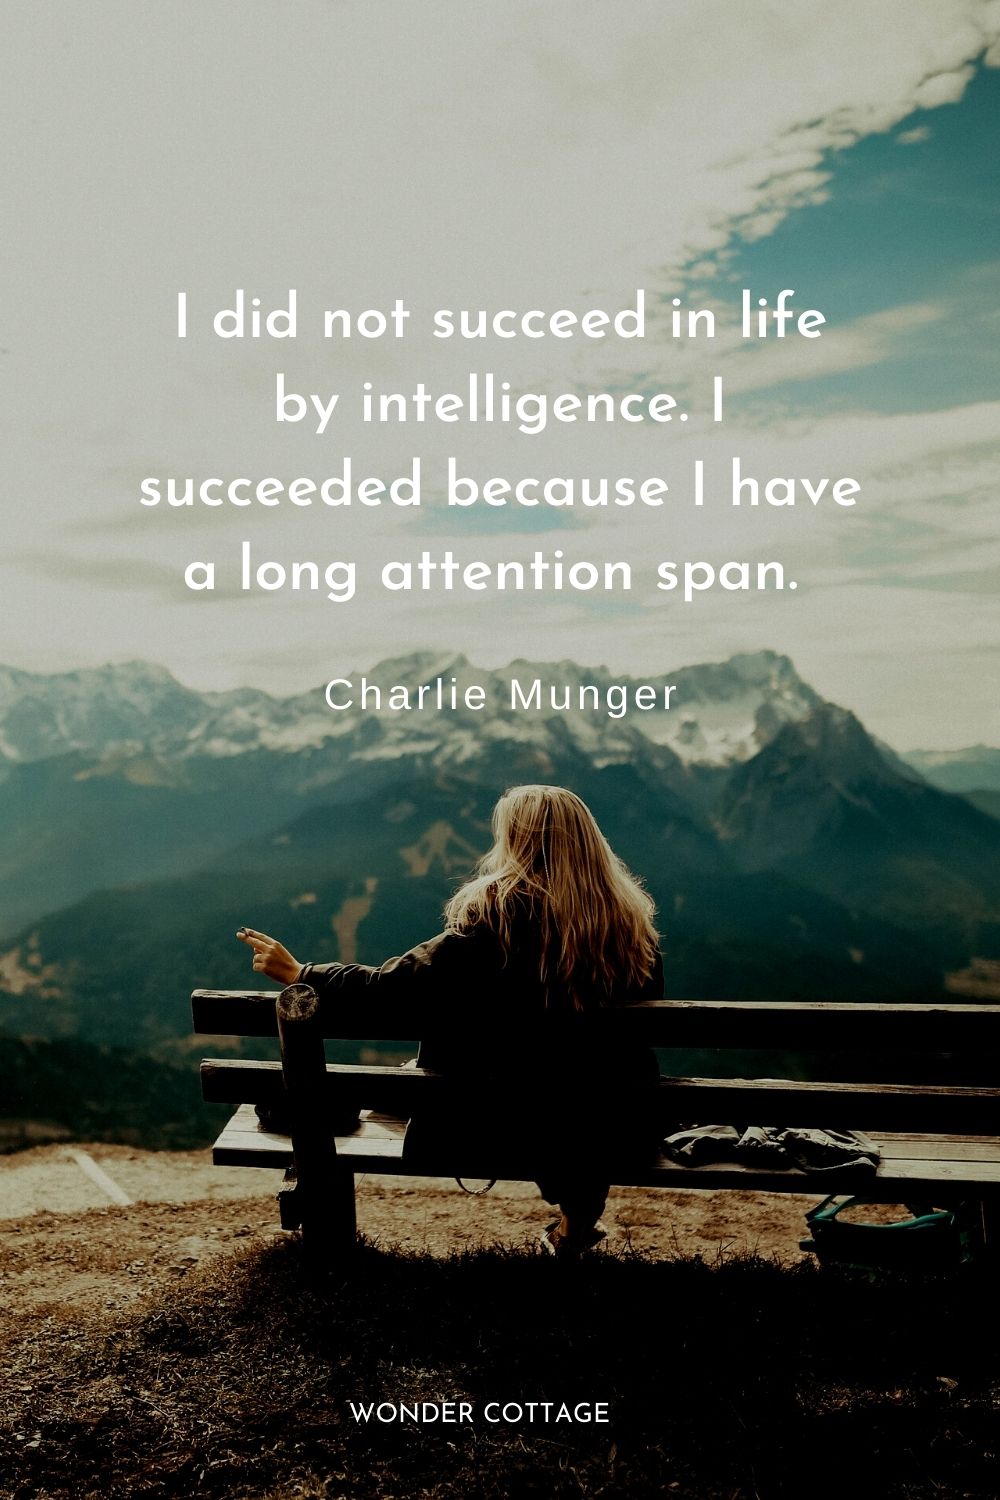 I did not succeed in life by intelligence. I succeeded because I have a long attention span. Charlie Munger